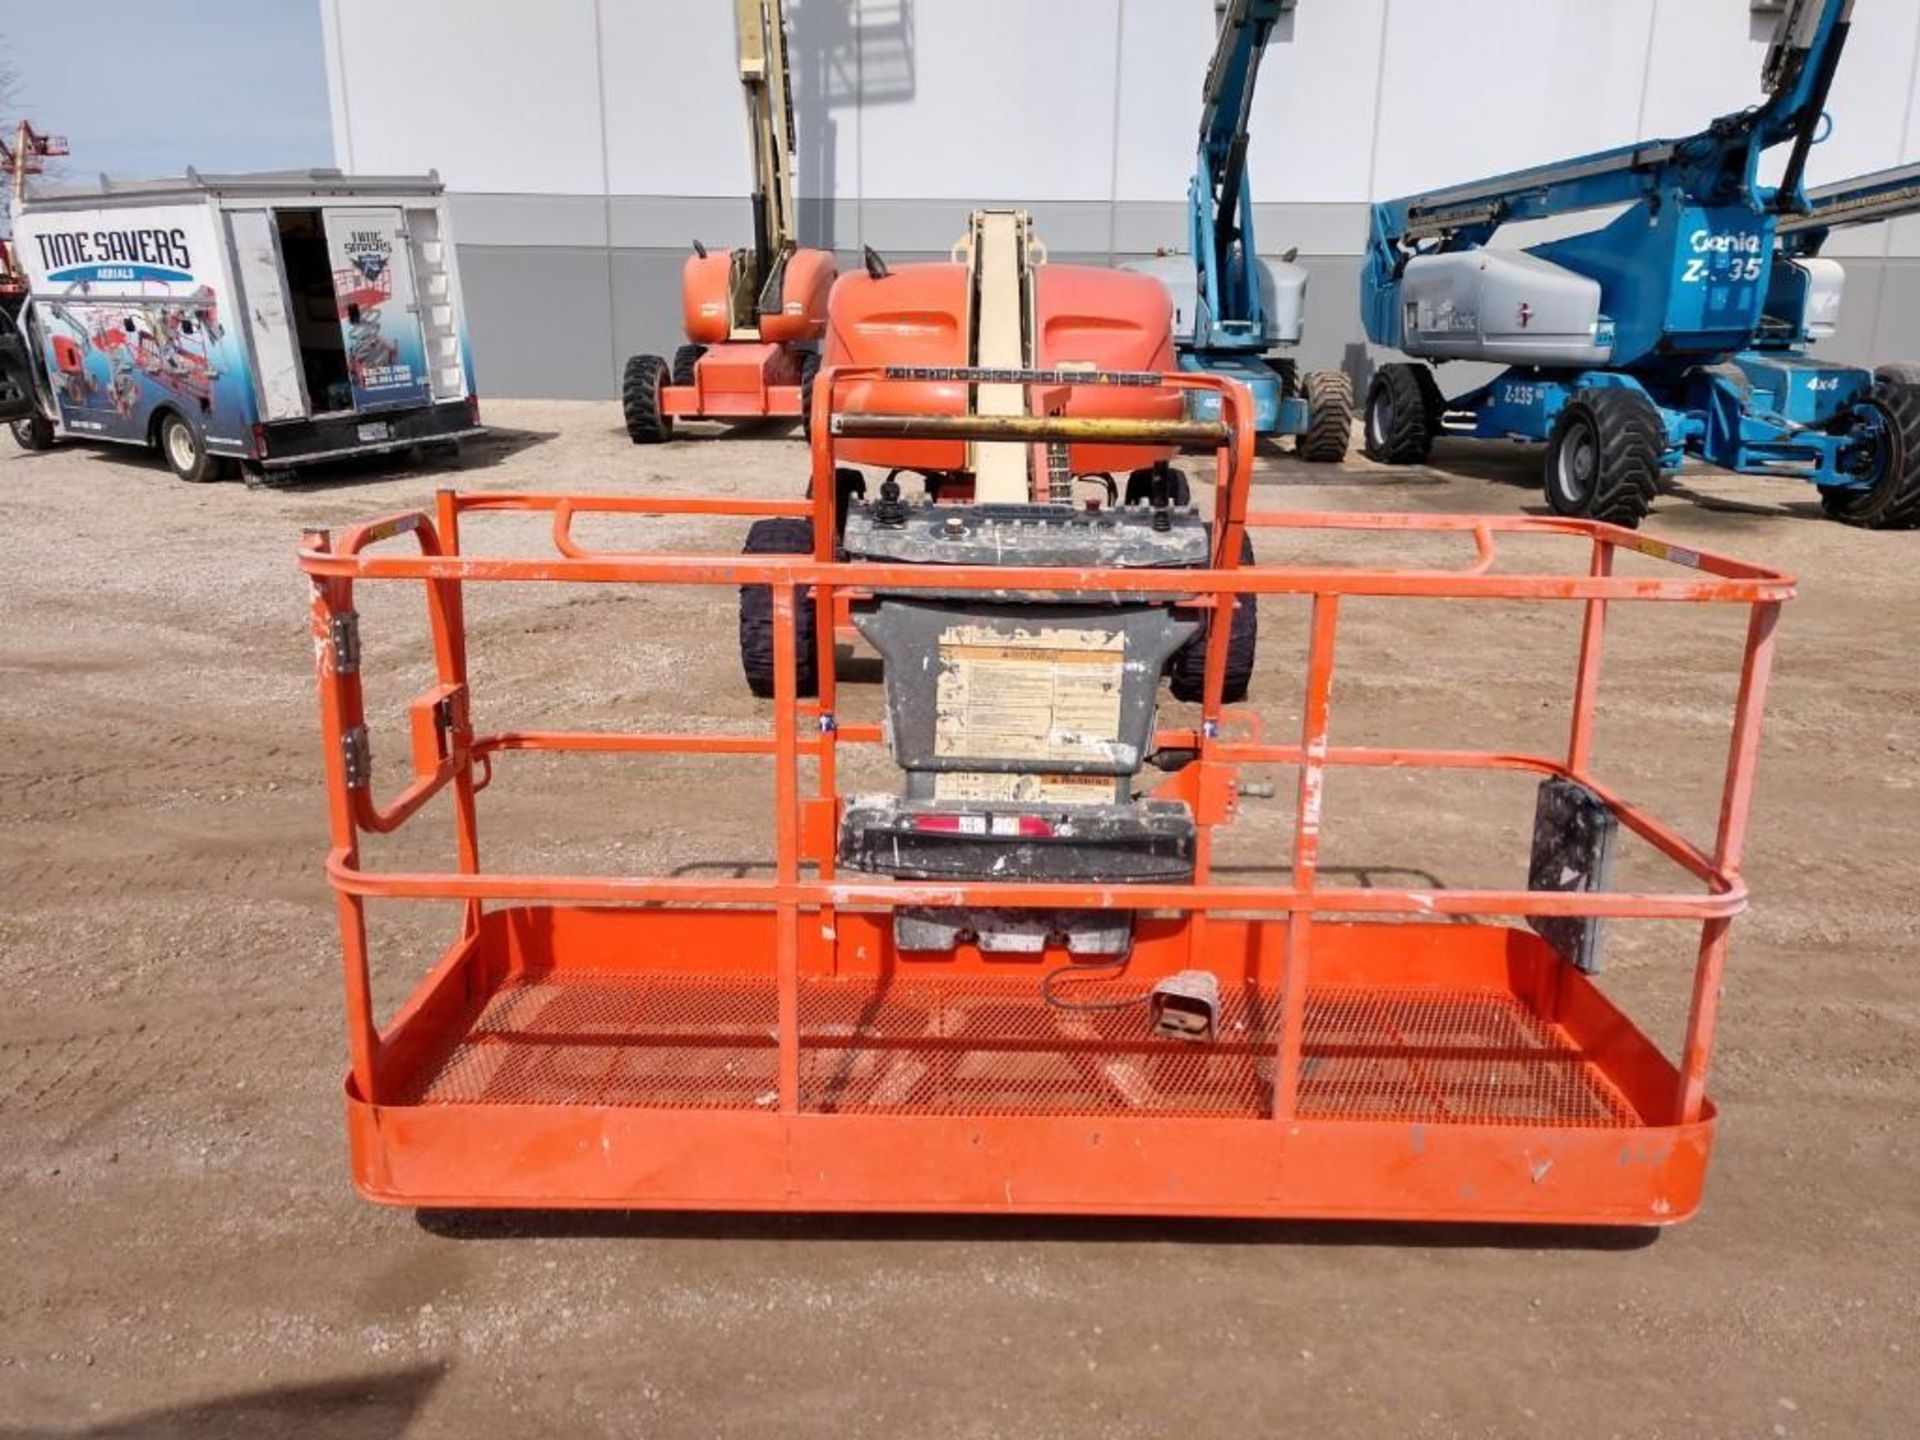 JLG 400S Rough Terrain Articulating Boom Lift (S/N 300137008, Year 2009), with 40' Platform - Image 4 of 6